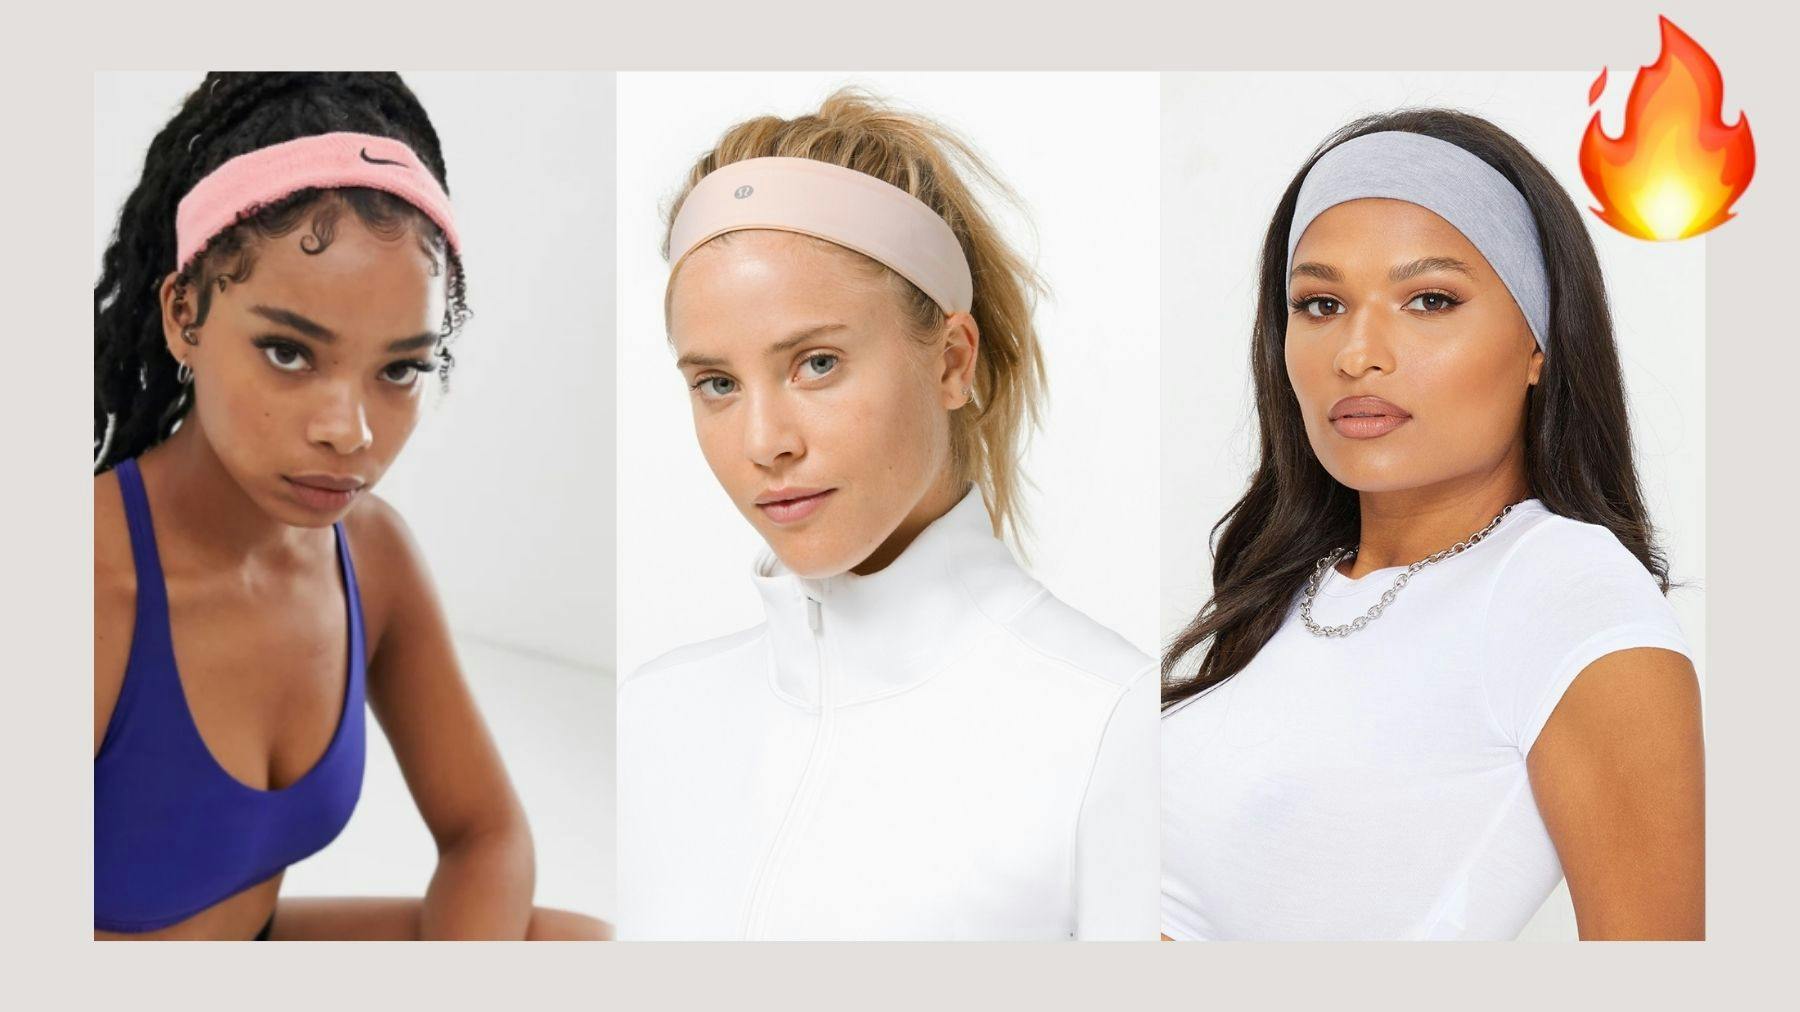 Elastic Stretchy Non-slip Headwrap Soft Microfiber Casual Sports Style Hairband for Yoga Running Tennis Workout Fitness Exercise & More Rhino Valley Sports Headbands for Women 